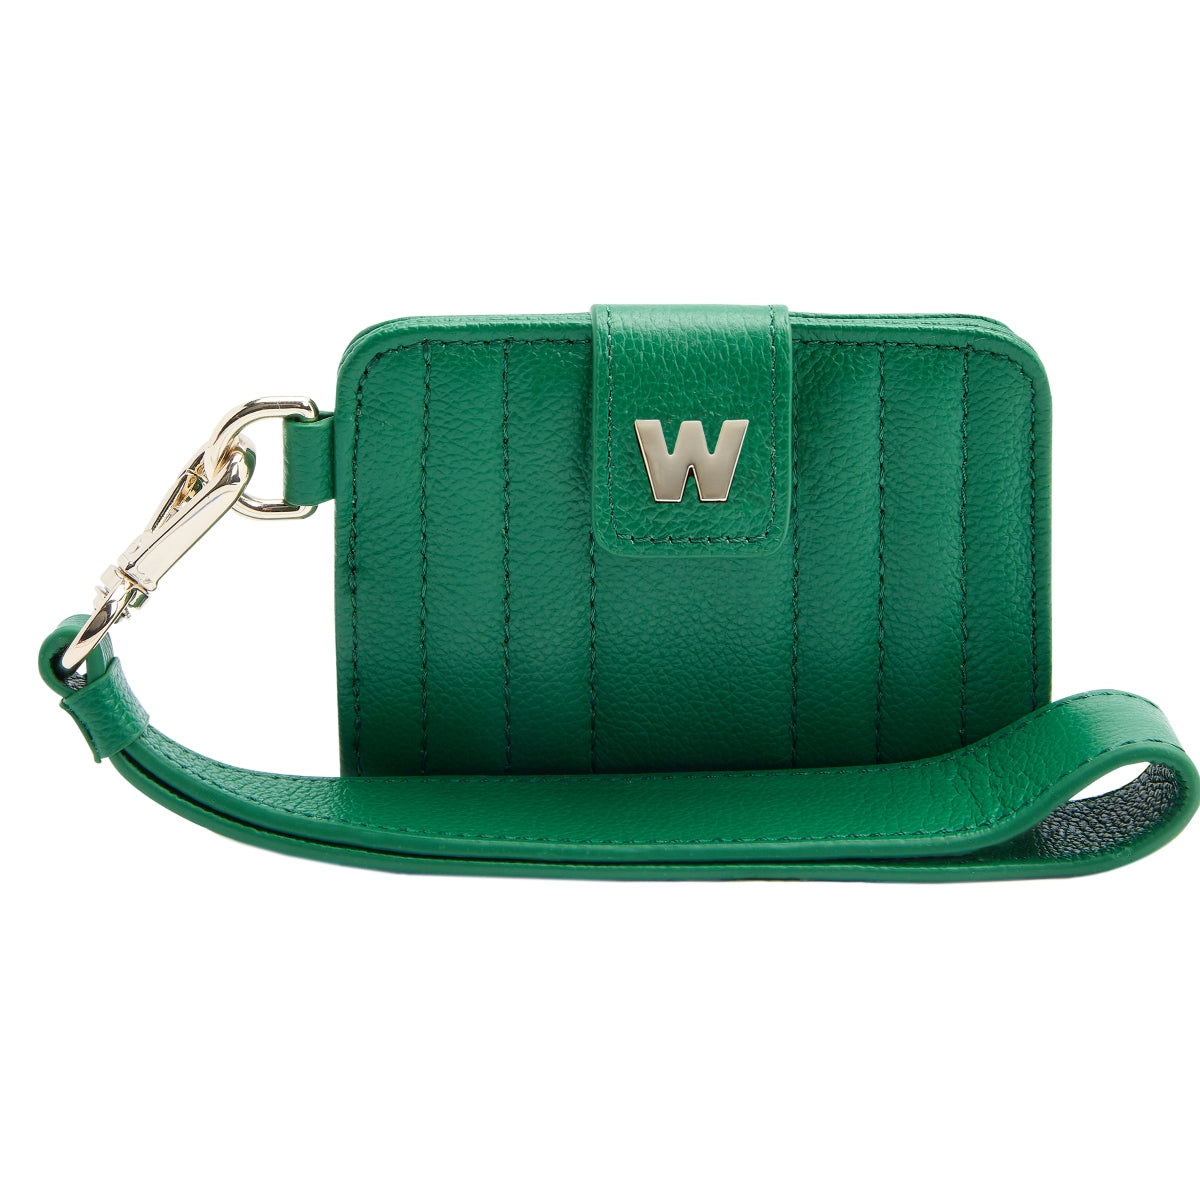 Wolf Mimi Collection Leather Green Credit Card Holder with Wristlet - Green